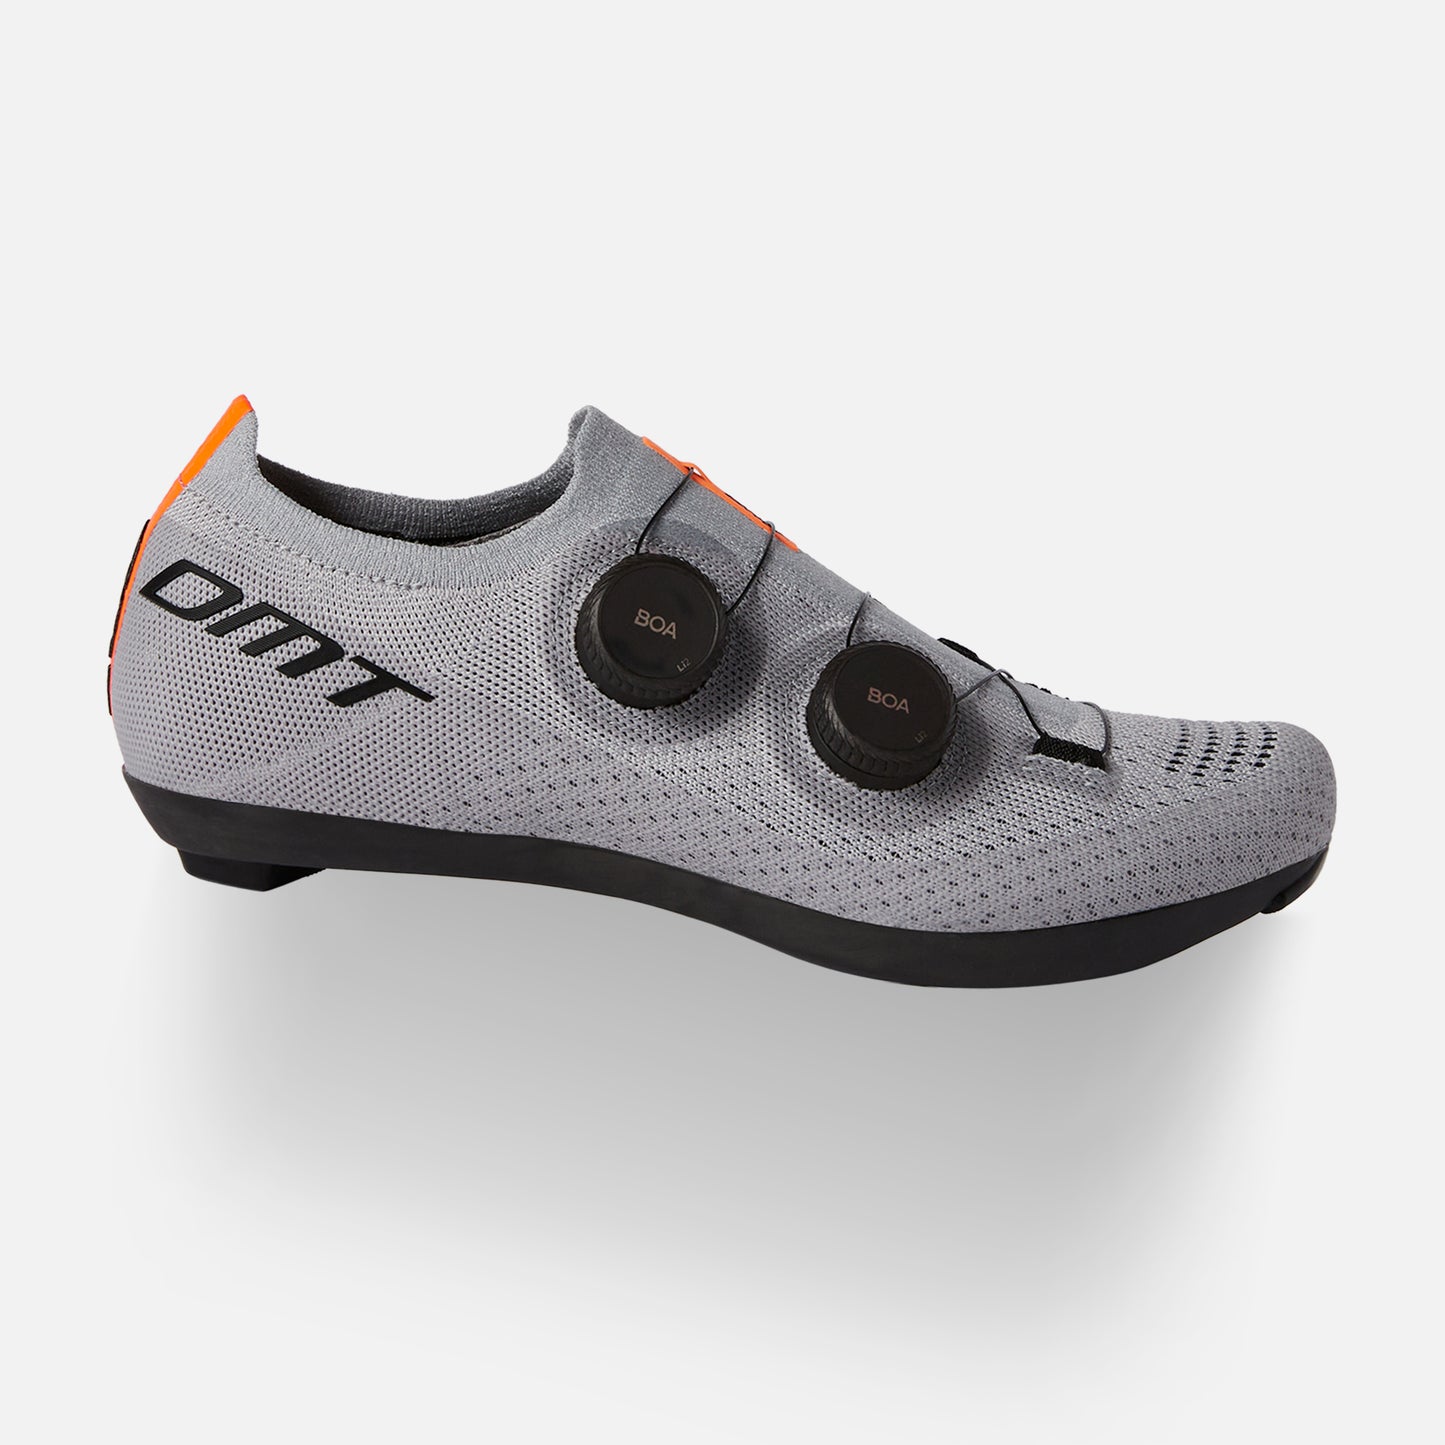 DMT Cycling - Cycling shoes: mtb, road and carbon bike shoes